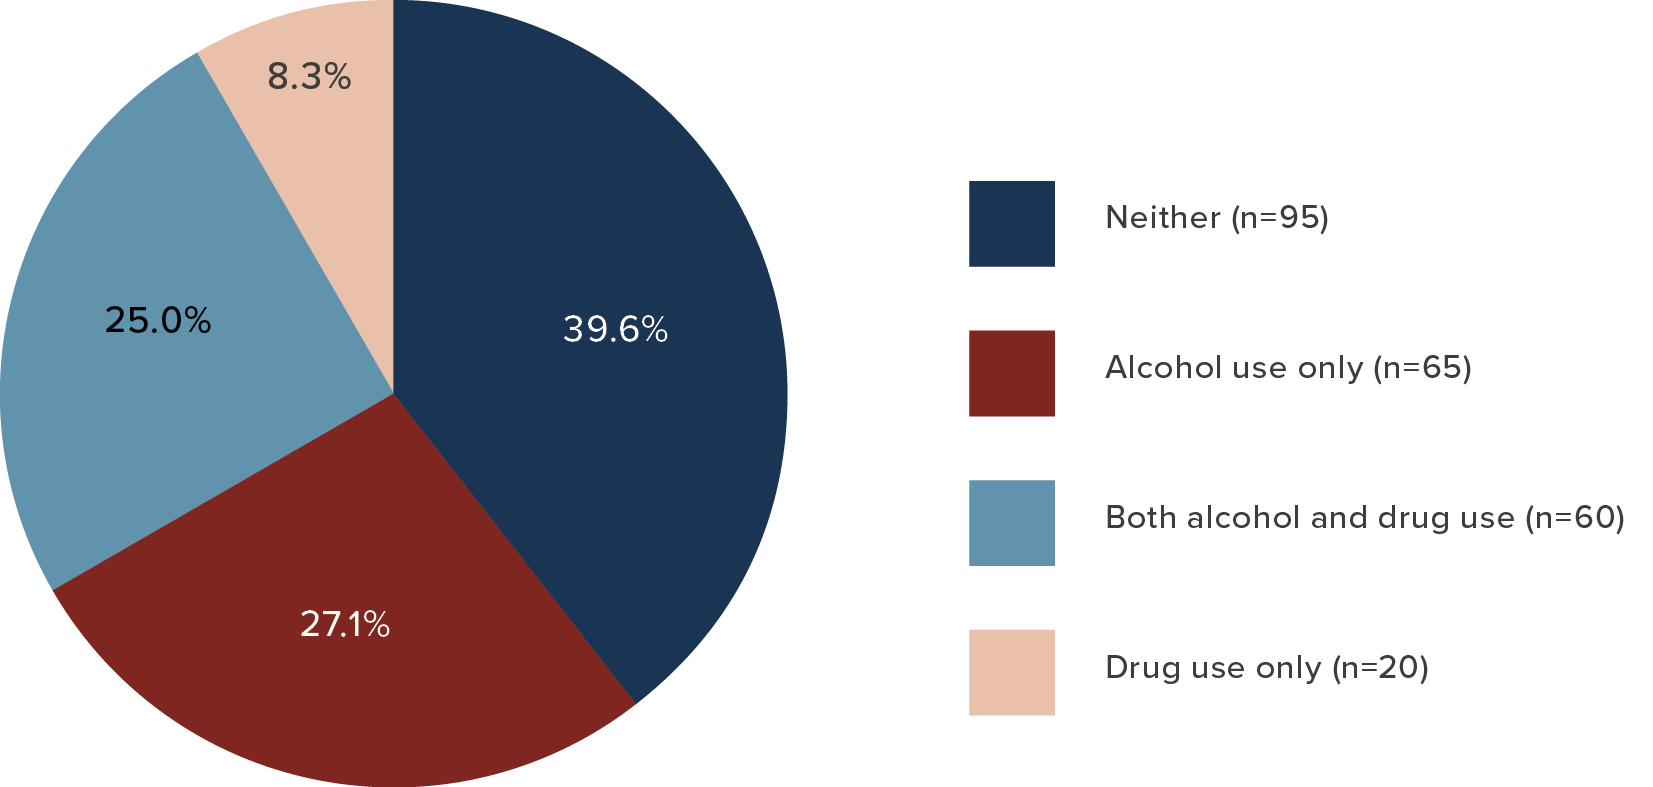 A pie chart with the following data: Neither (n=95): 39.6%. Alcohol use only (n=65): 27.1%. Both alcohol and drug use (n=60): 25.0%. Drug use only (n=20): 8.3%.